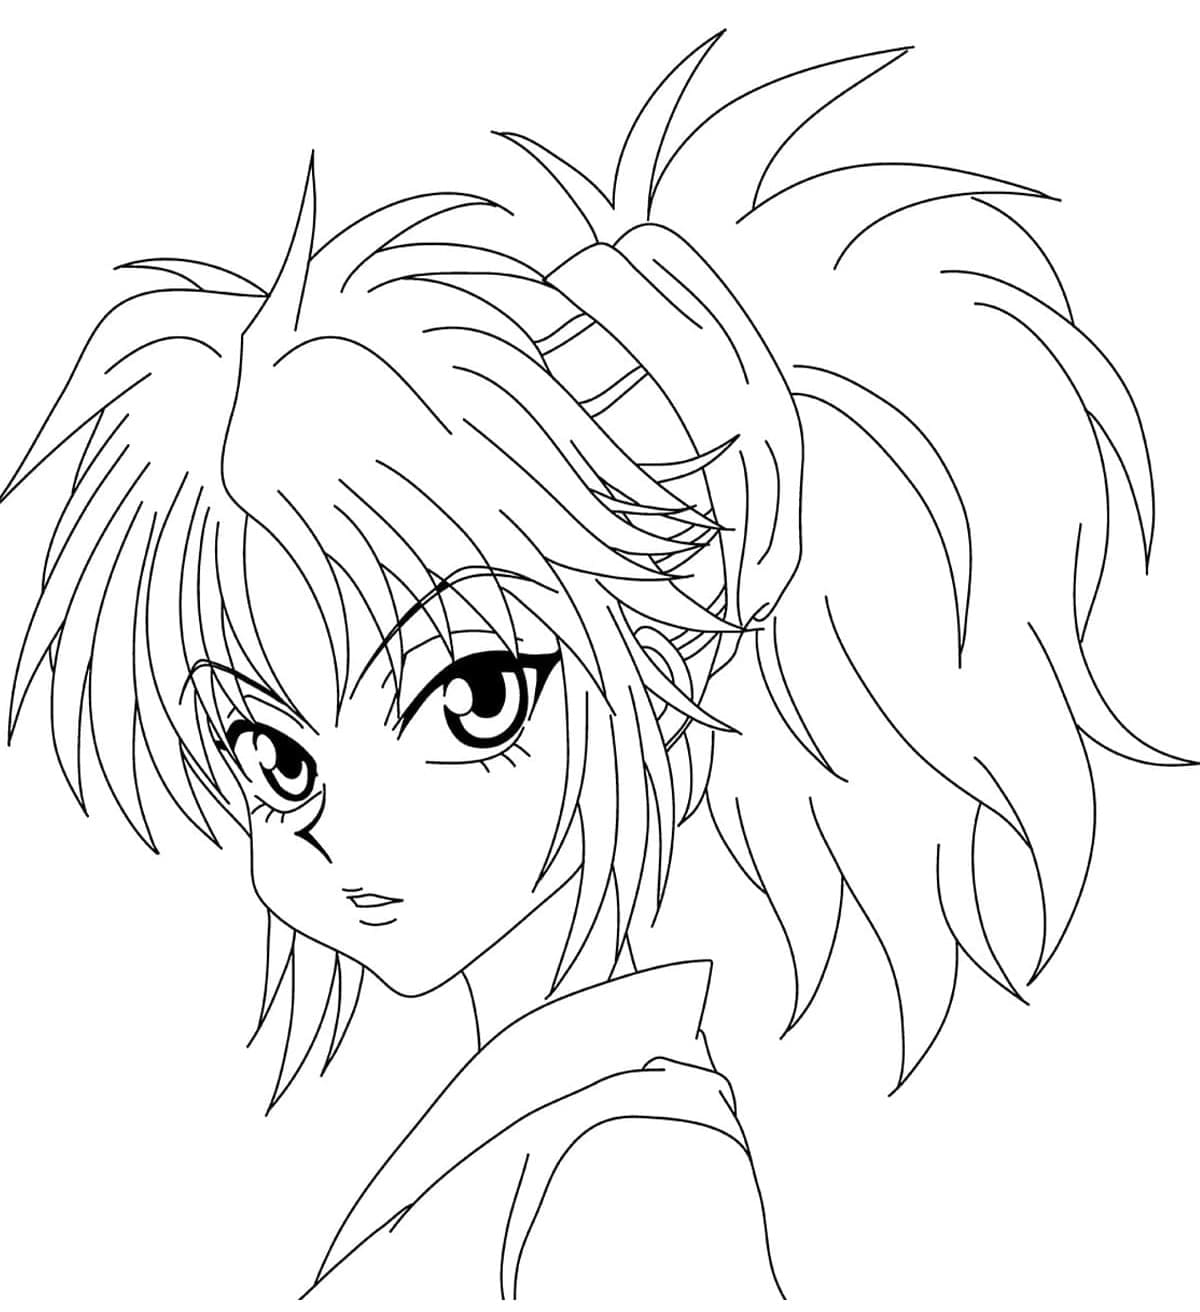 Machi Komacine from Hunter x Hunter coloring page - Download, Print or ...